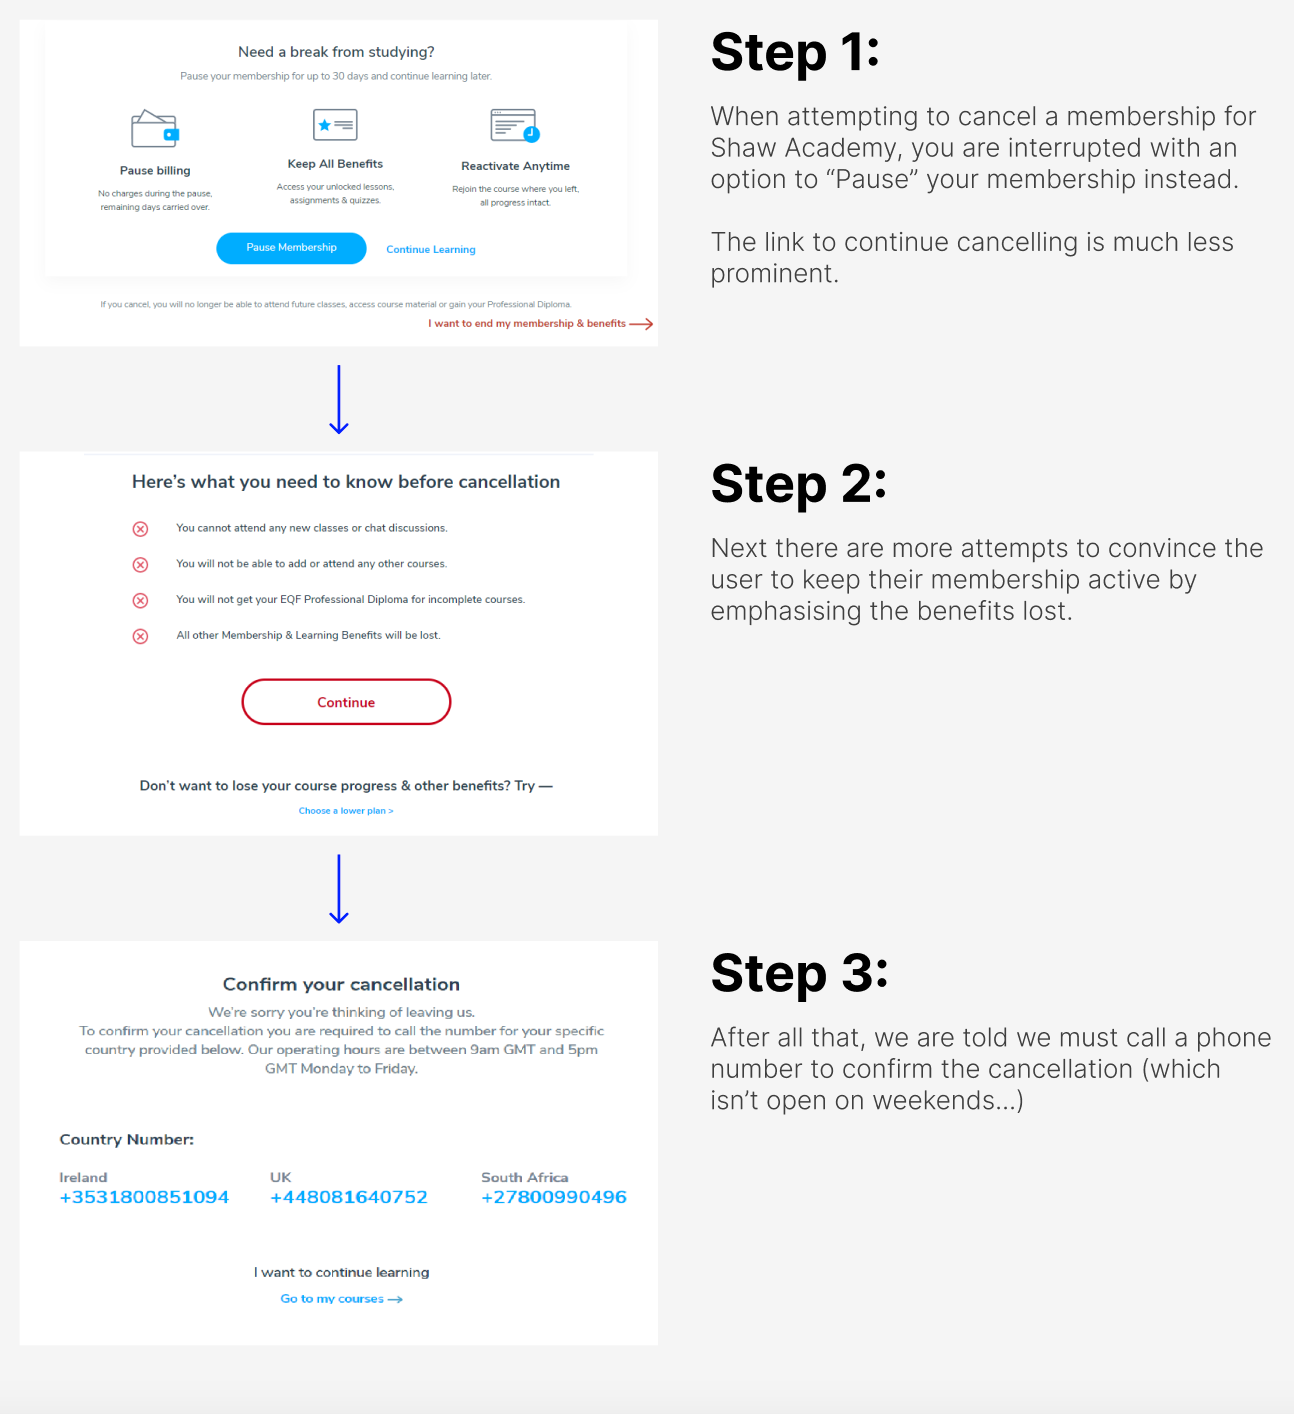 Screenshots showing the process for cancelling an online course subscription membership